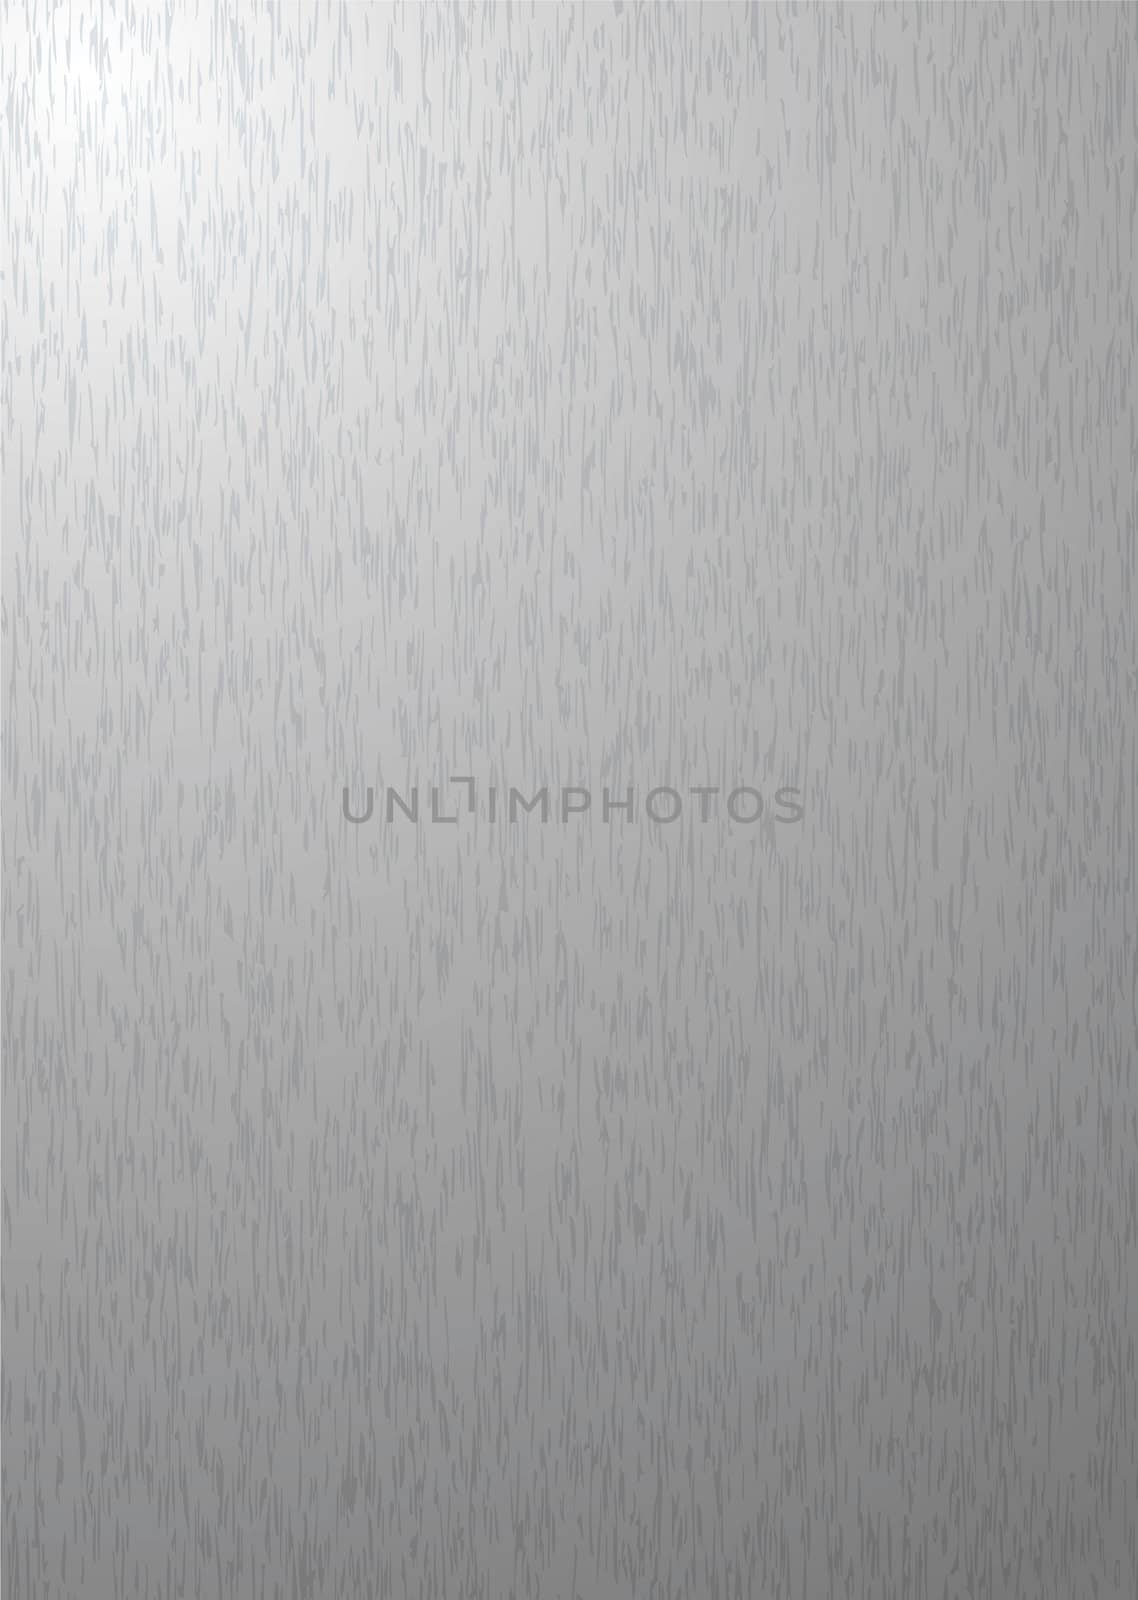 Brushed silver metal aluminum background with grain